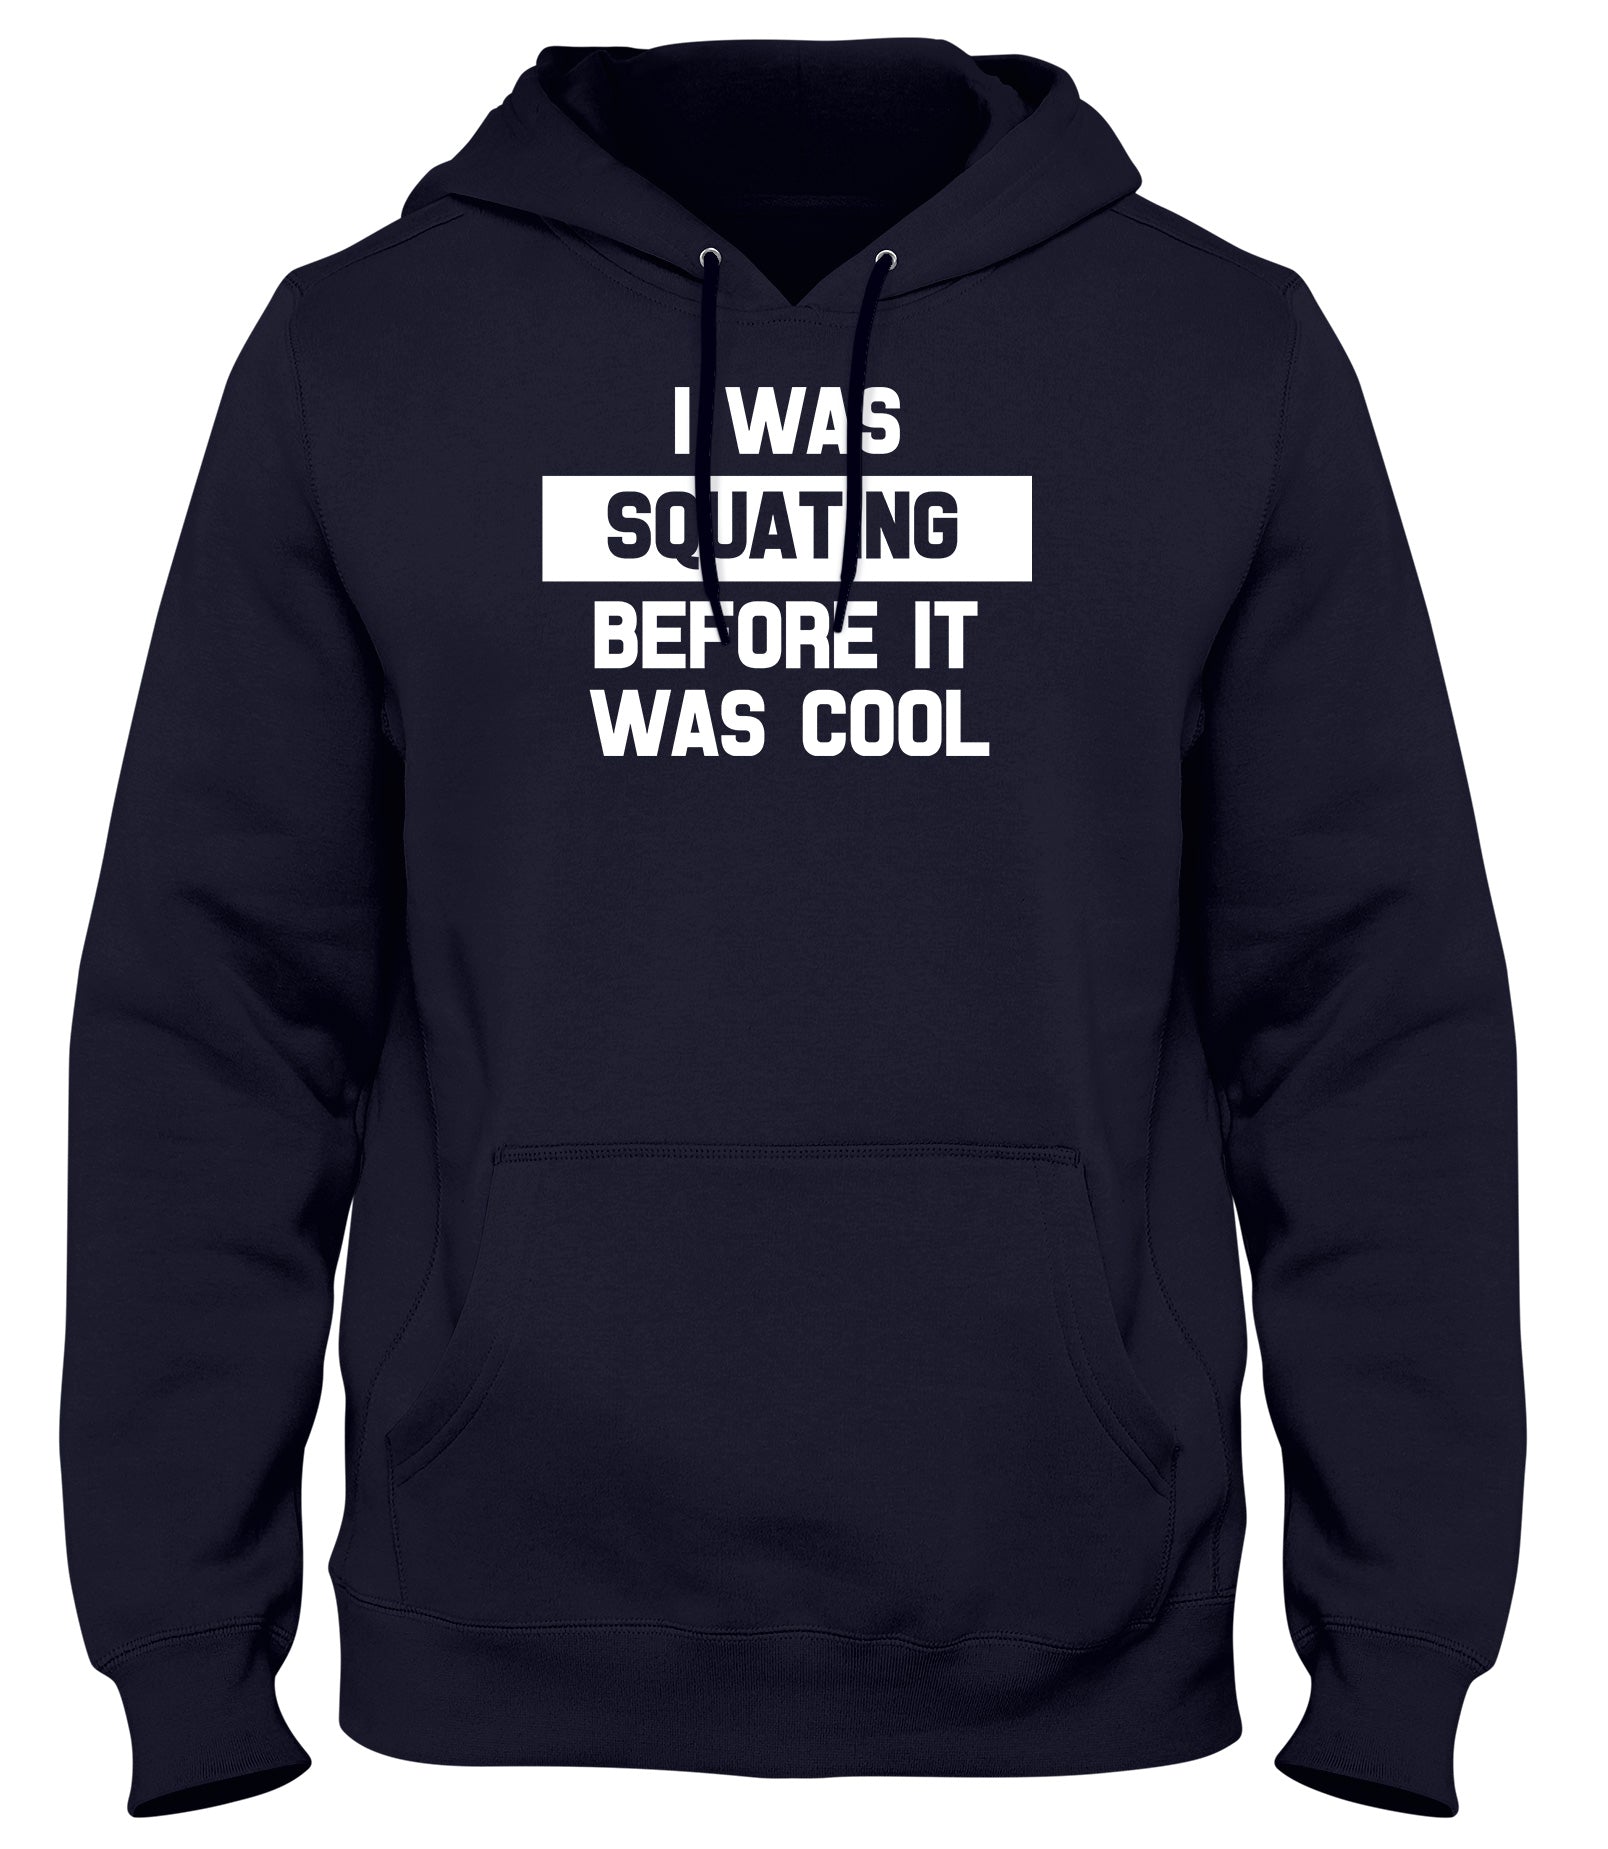 I WAS SQUATING BEFORE IT WAS COOL WOMENS LADIES MENS UNISEX HOODIE